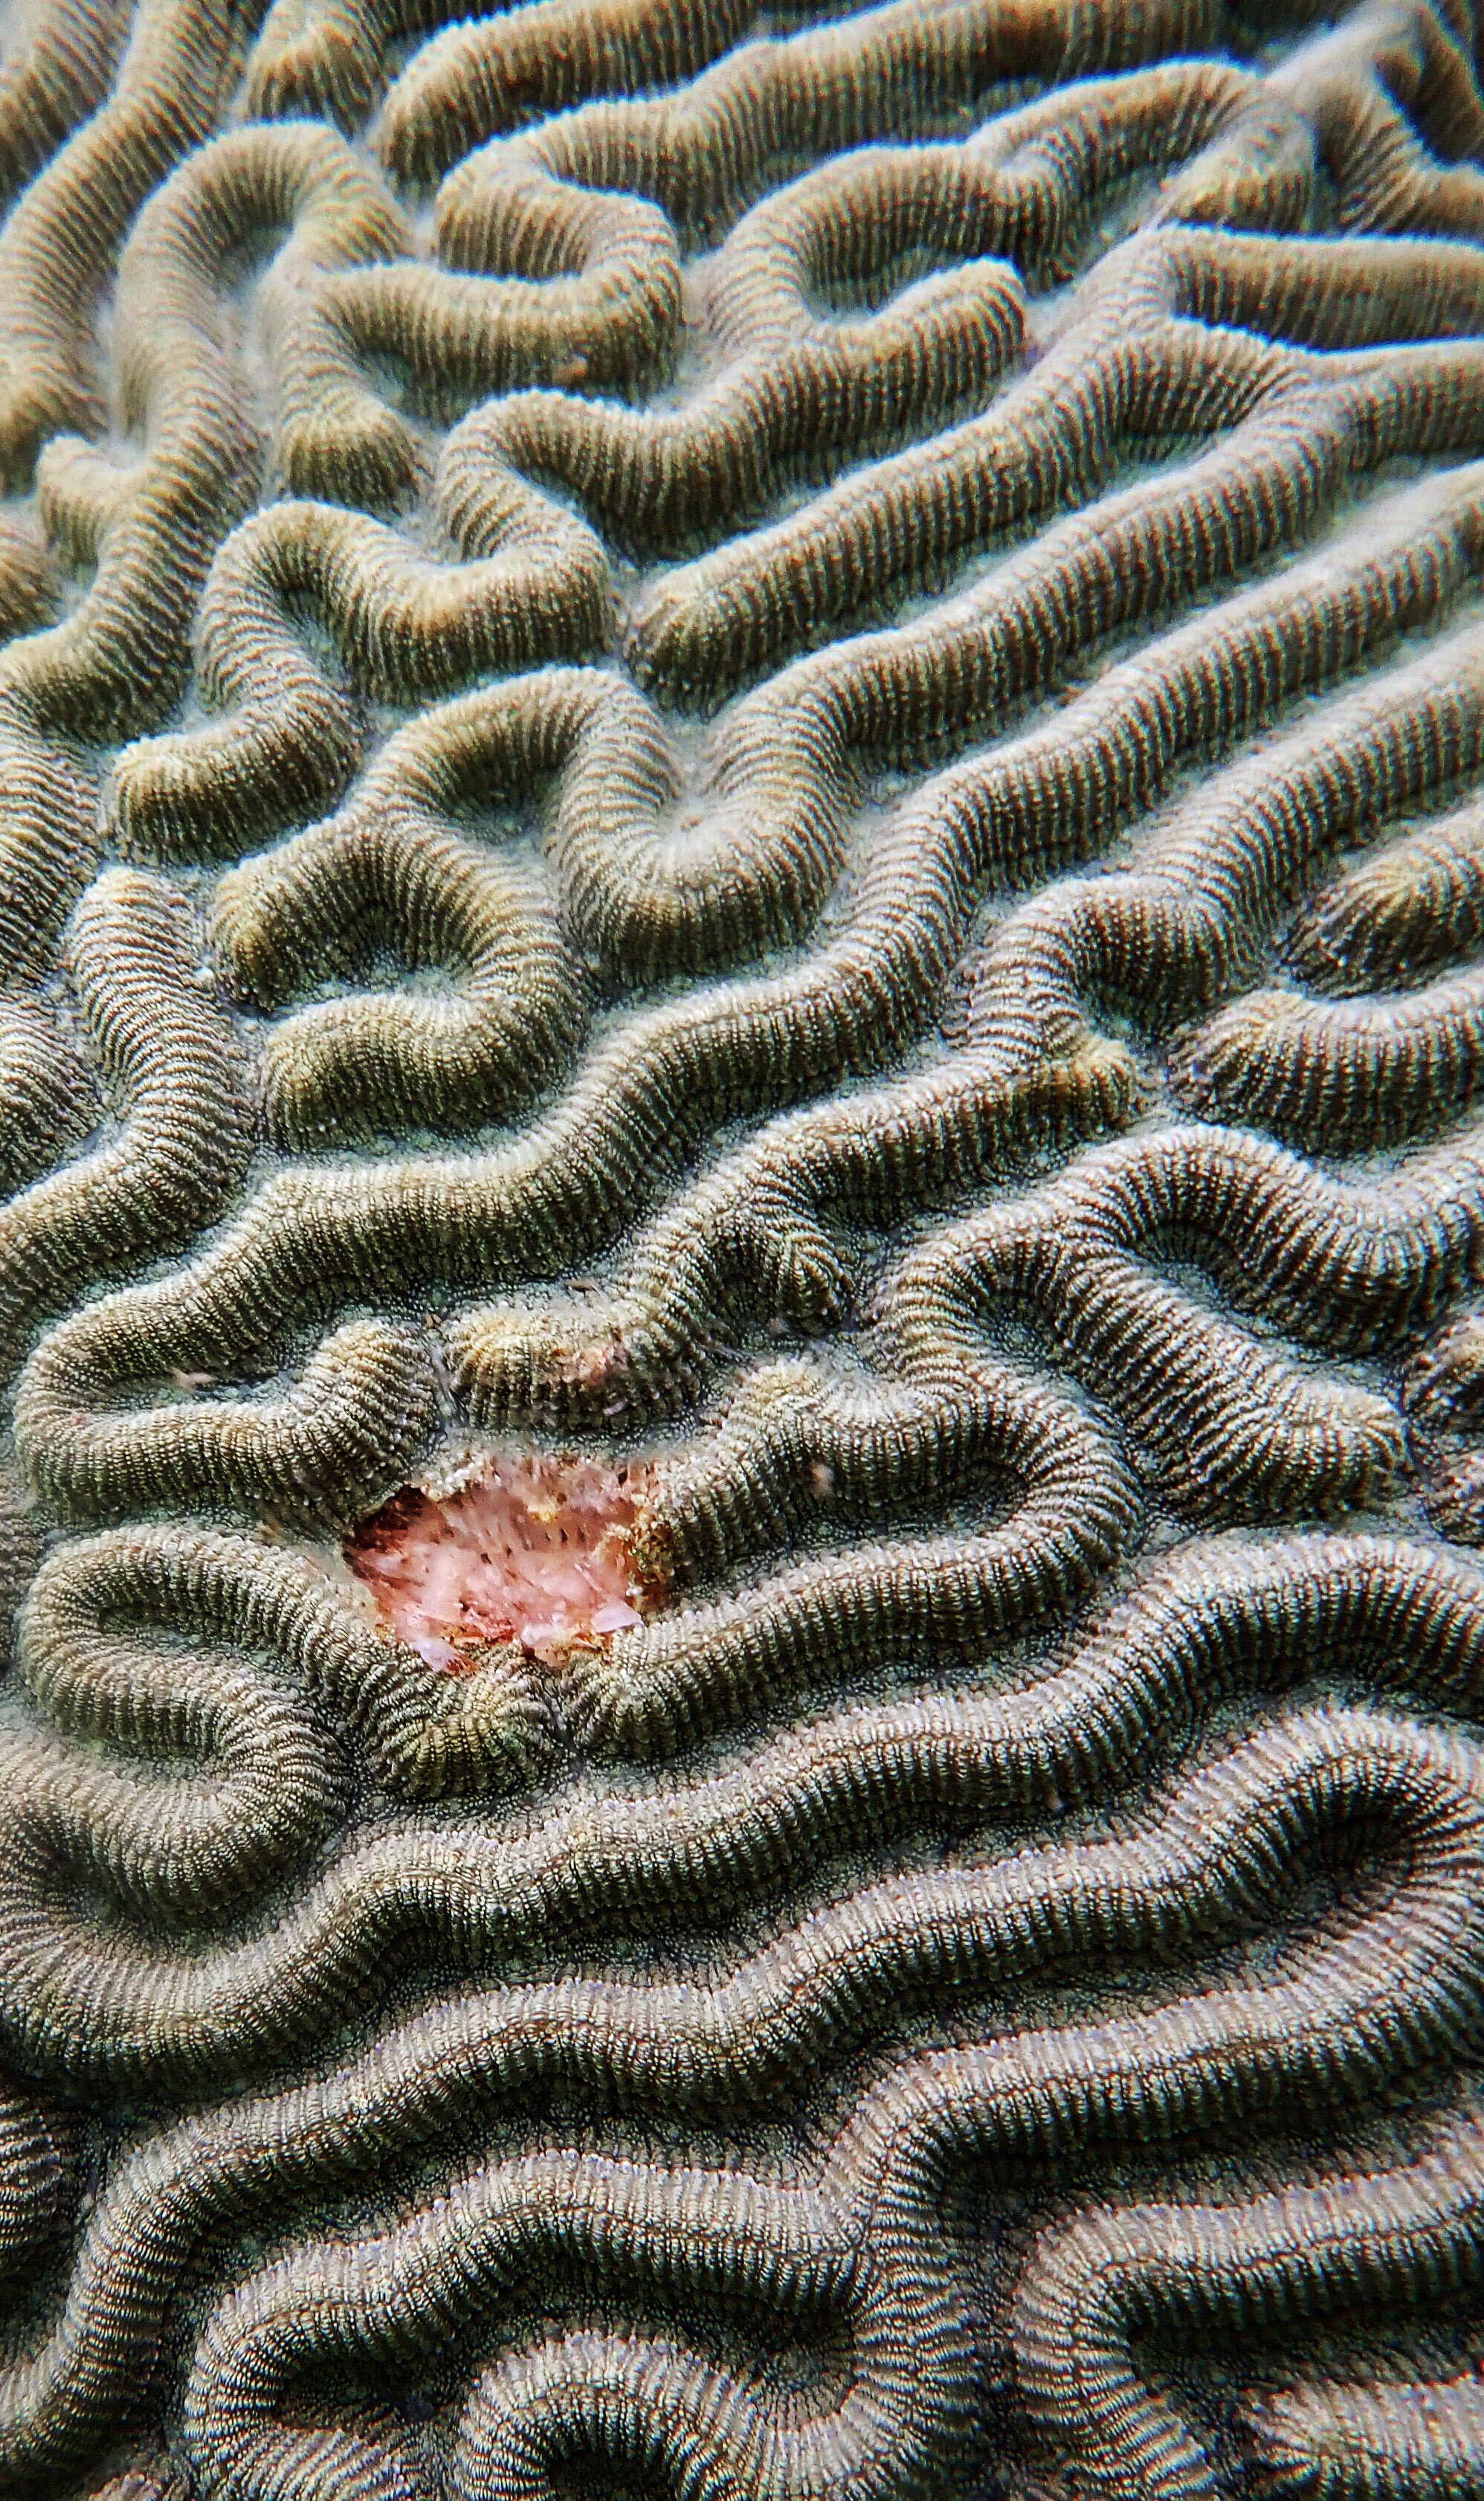 wounded brain coral.jpg